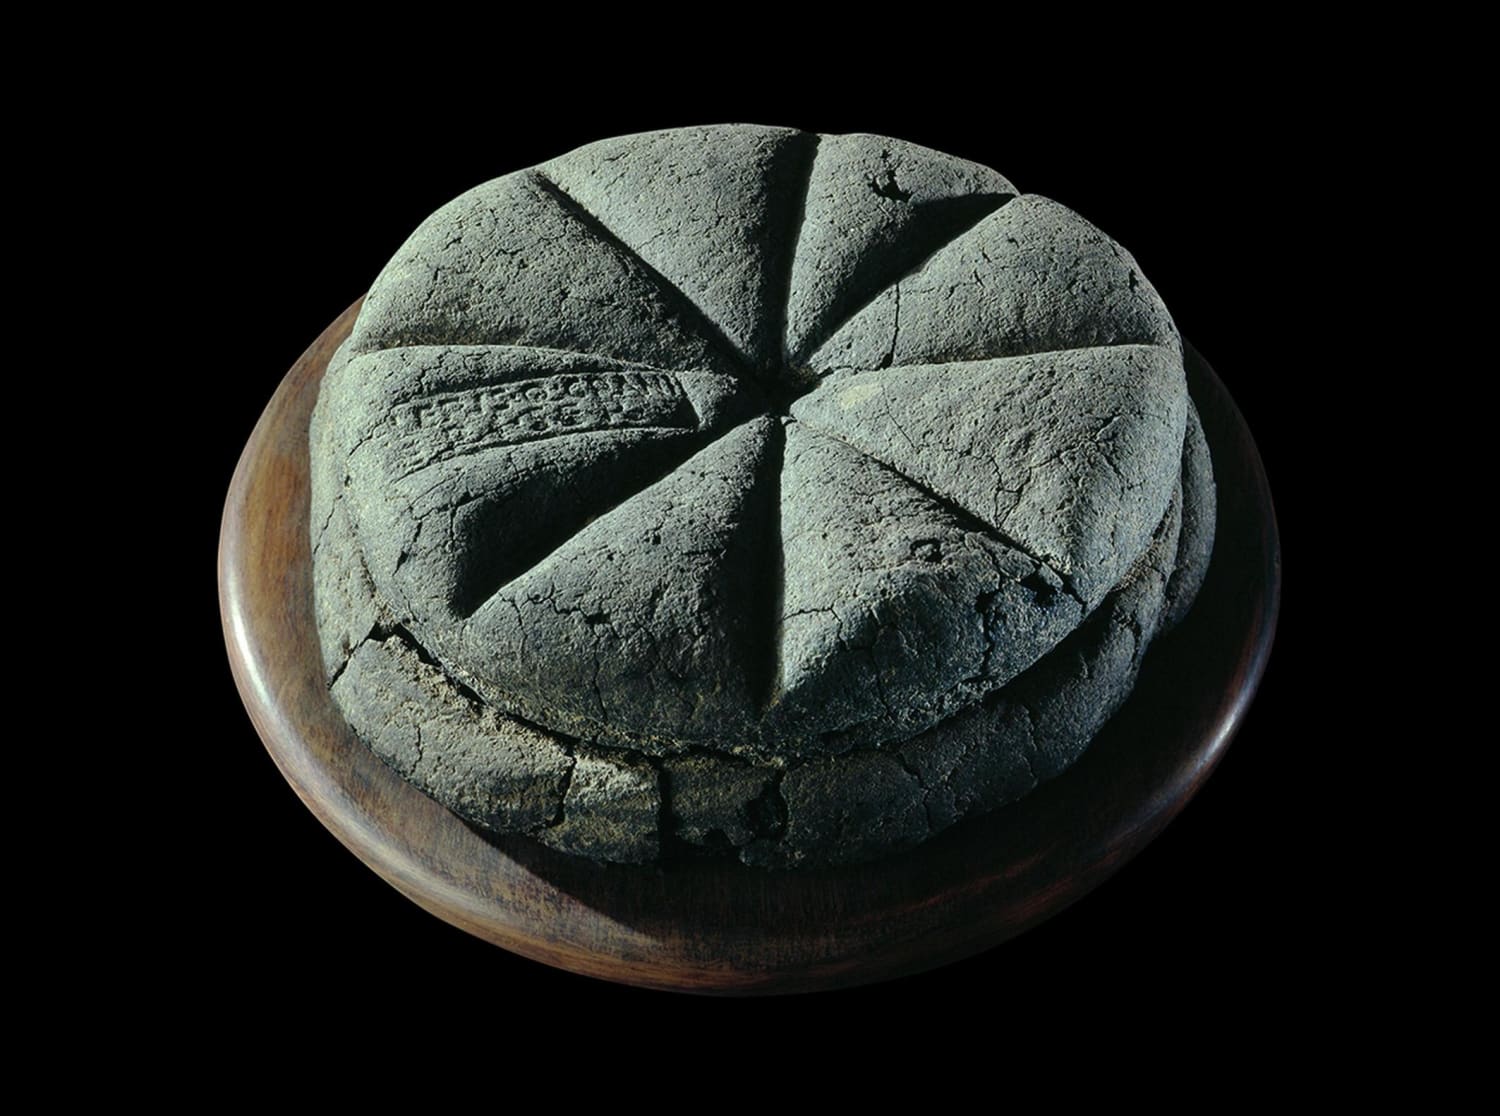 2000-year old bread from Pompeii that got preserved when Mount Vesuvius erupted